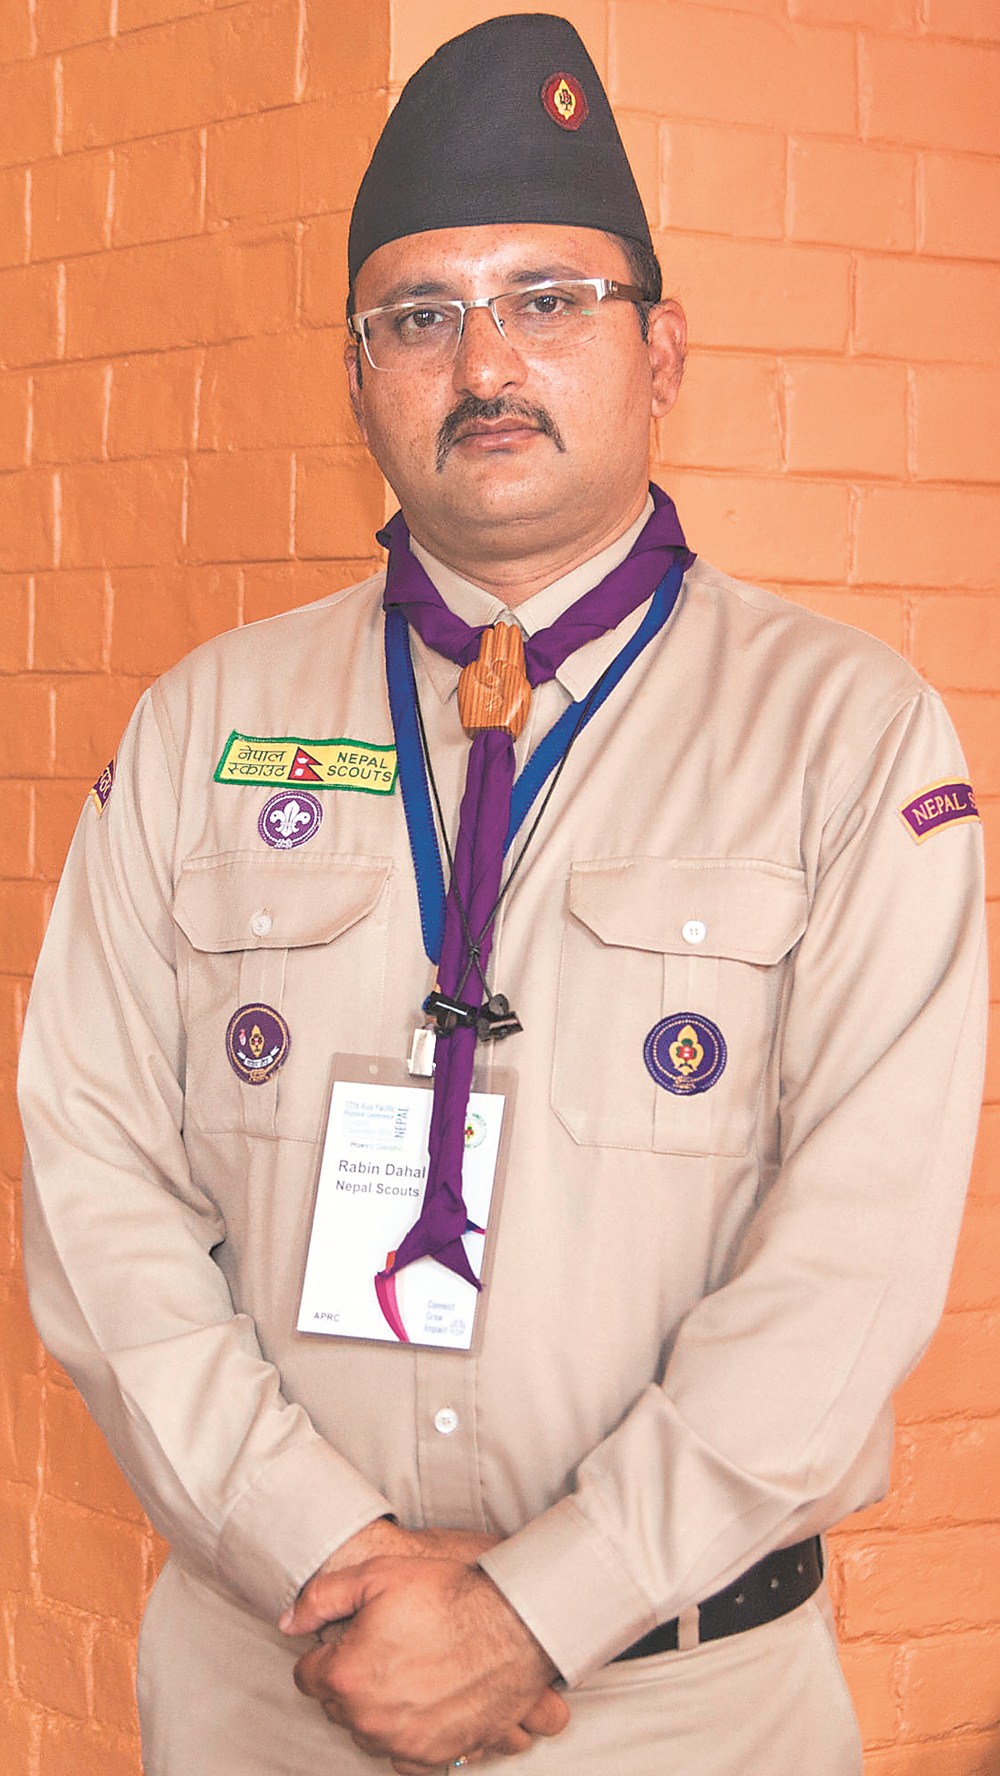 Rabin Dahal, Chief Commissioner, Nepal Scouts